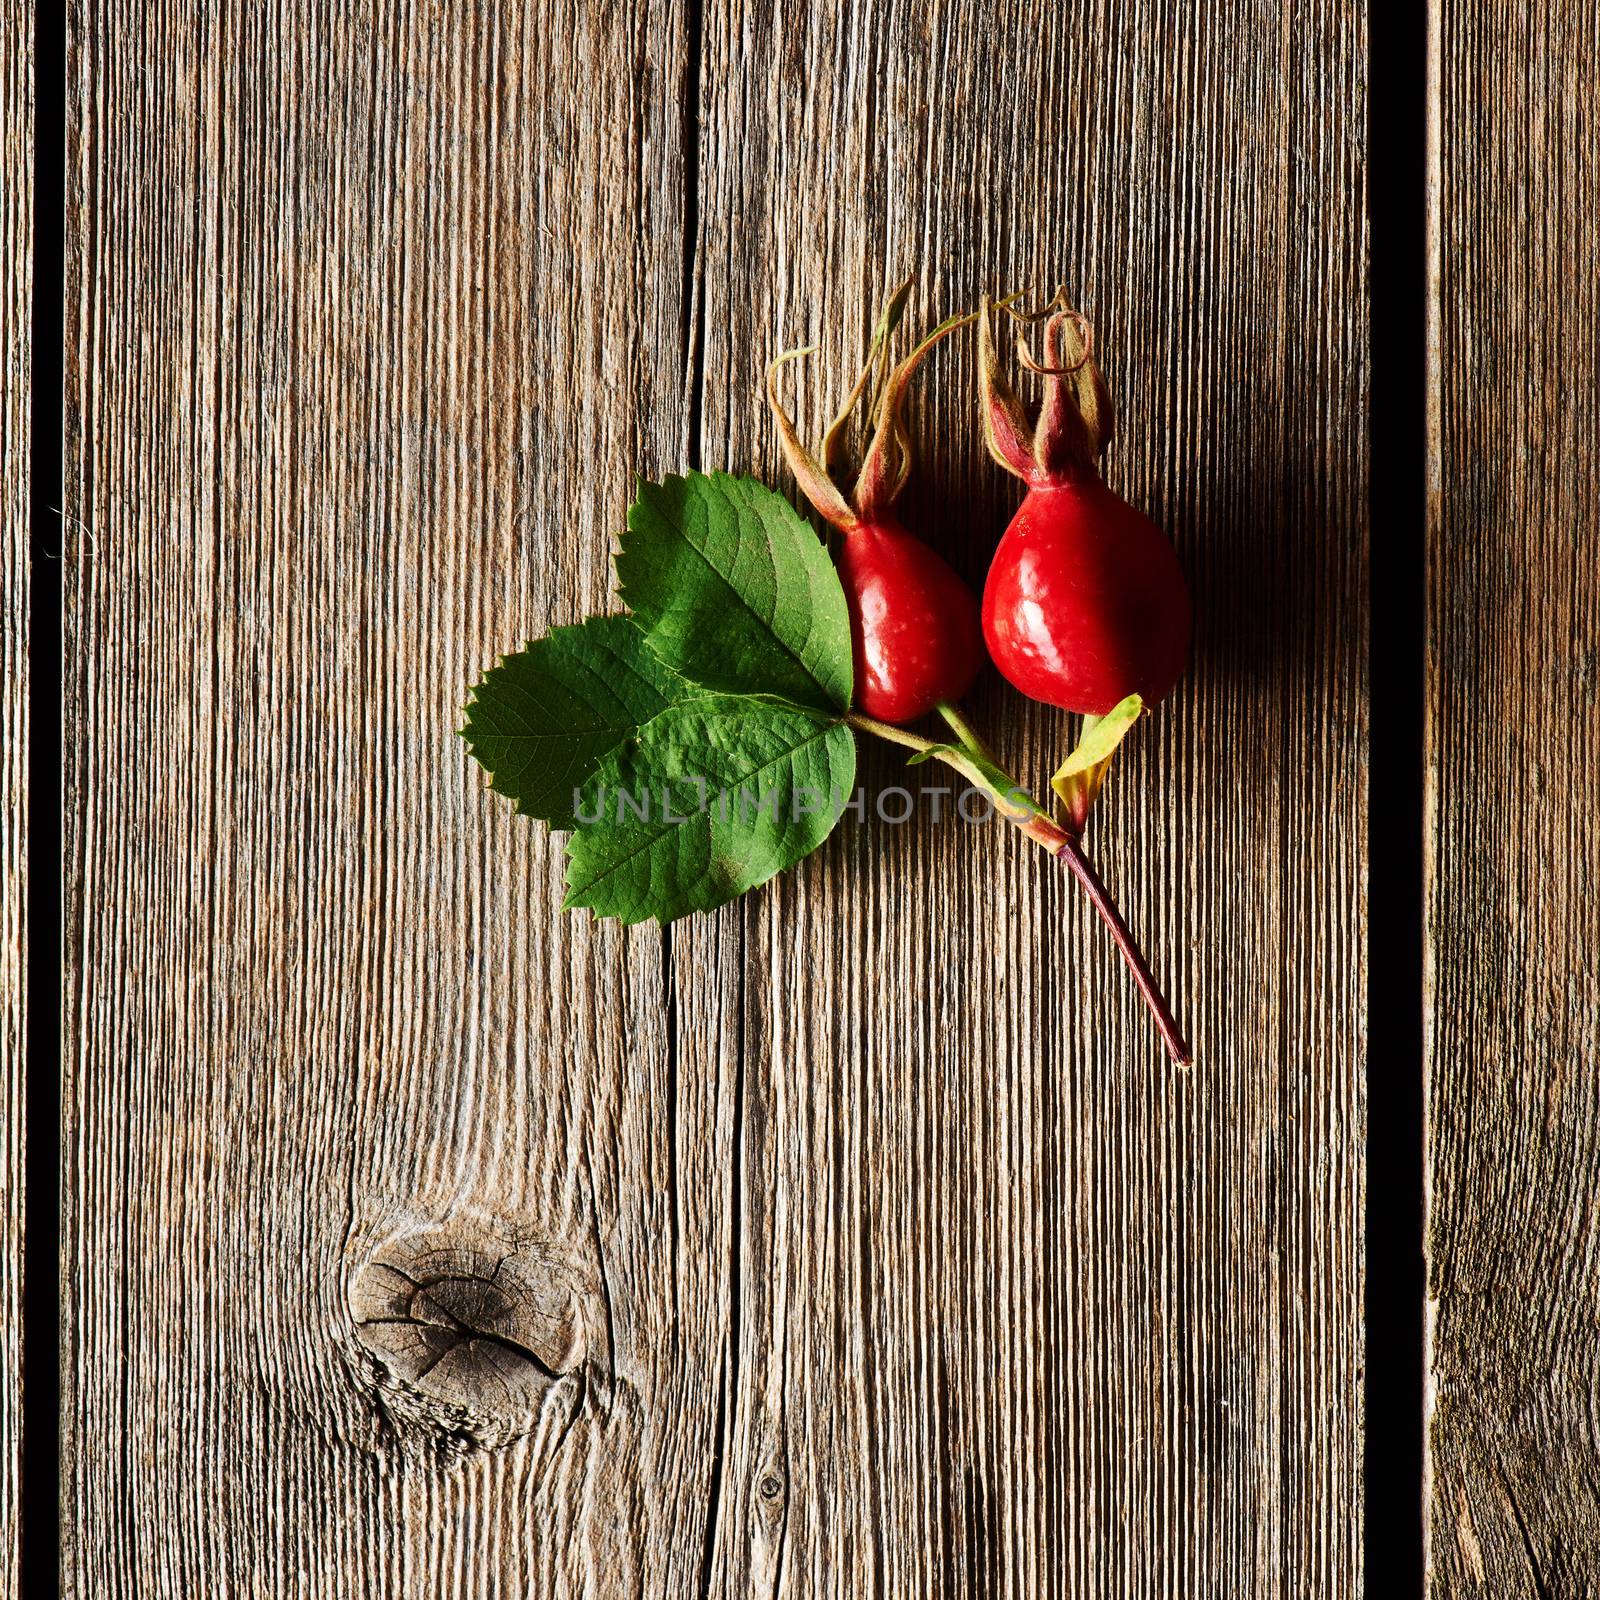 Rose hip over old wooden background by haveseen